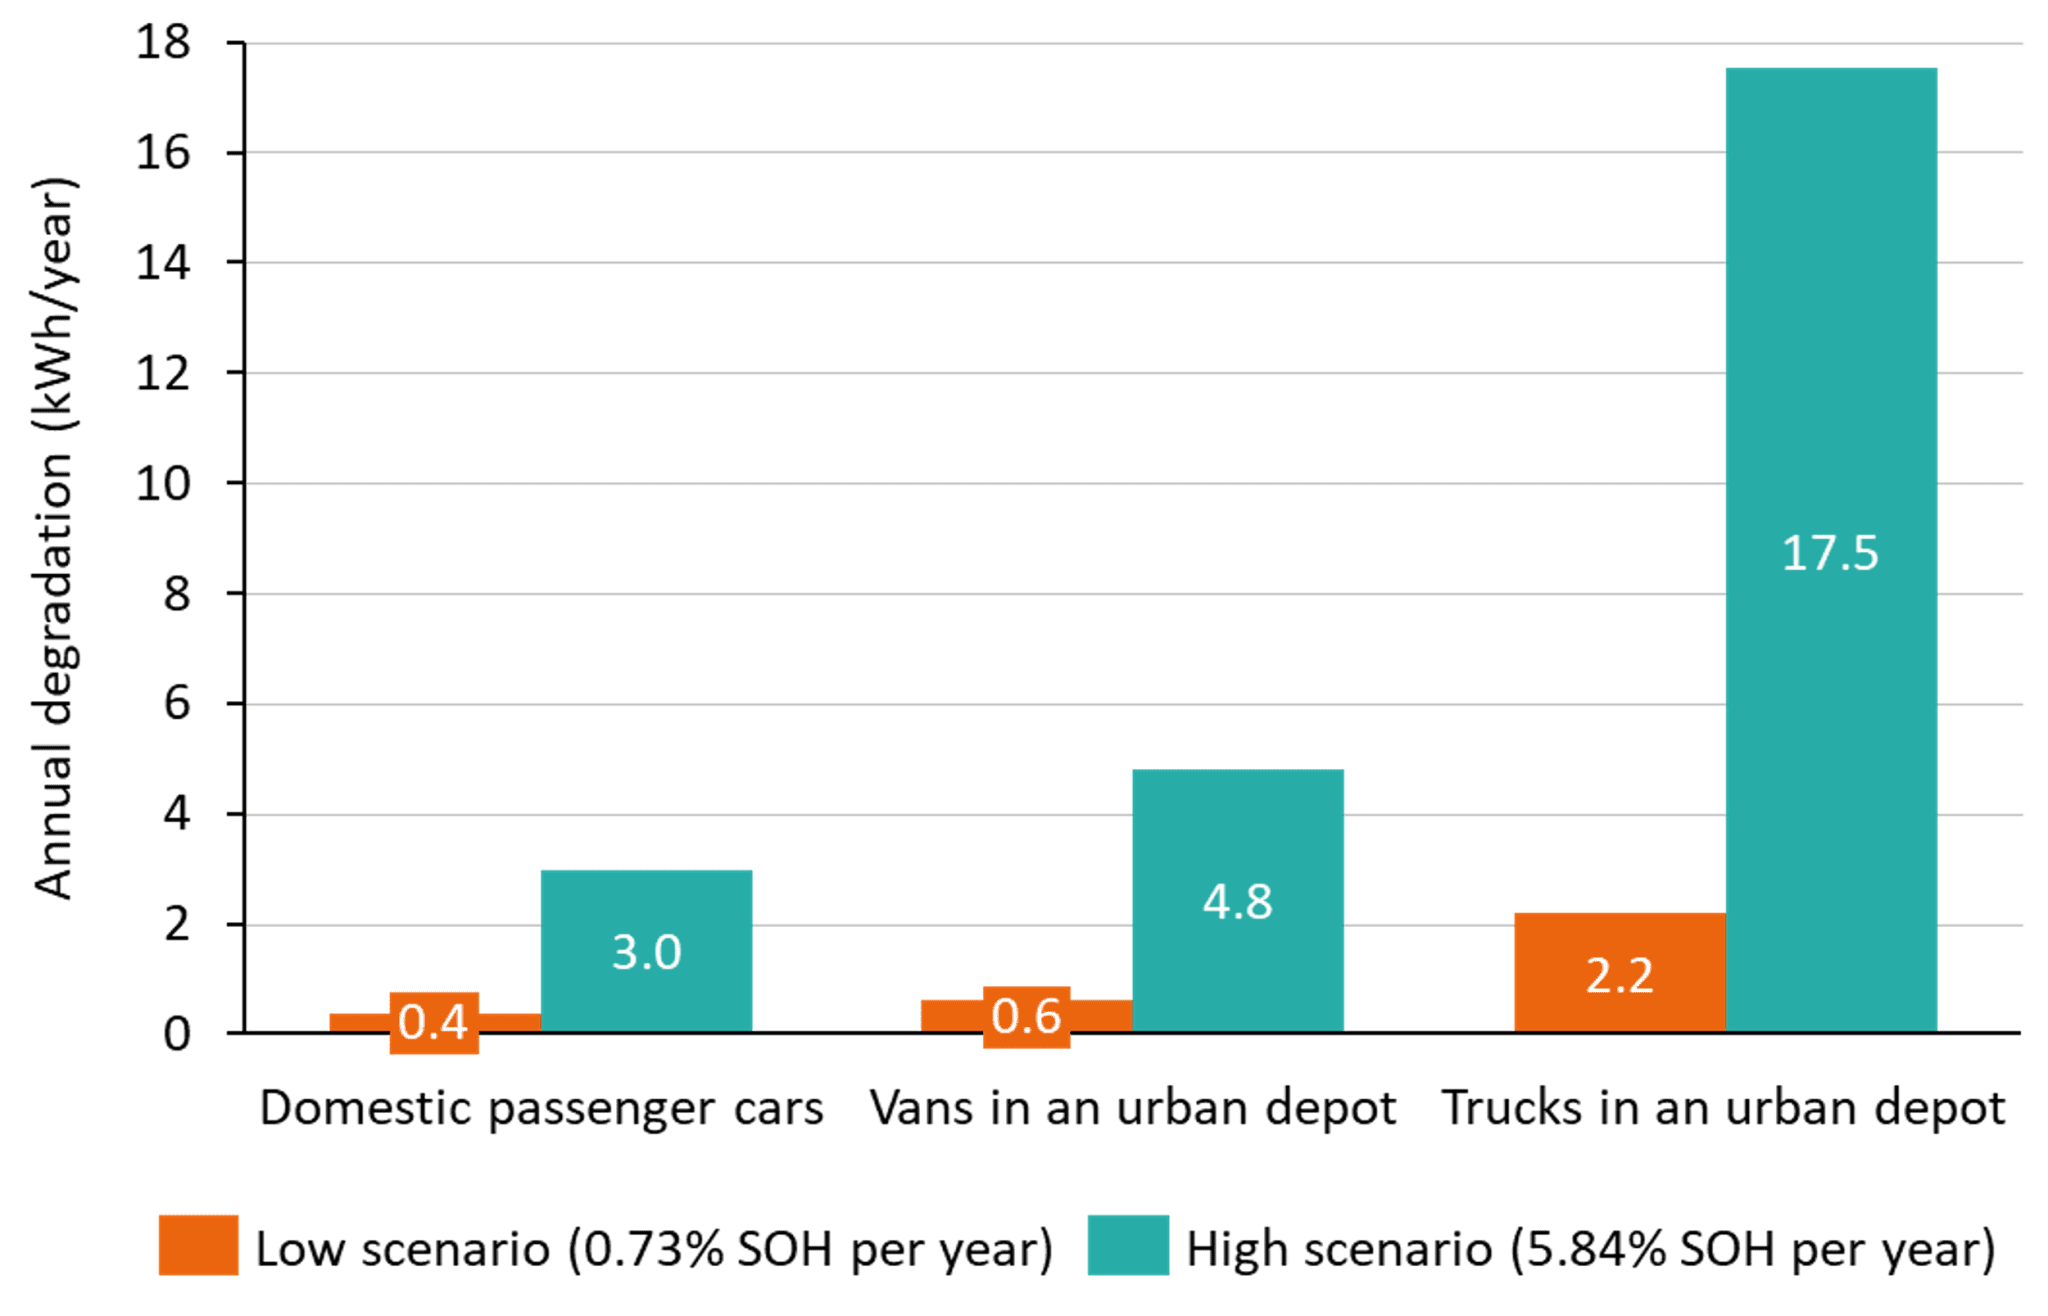 A bar chart showing the annual degradation in kilowatt-hours per year for domestic passenger cars, vans in an urban depot and trucks in an urban depot, respectively. The degradations have been given for both a low scenario (assuming a 0.73% state of health decrease per year) and high scenario (assuming a 5.84% state of health decrease per year). For domestic passenger cars, the low scenario is 0.4 kWh per year and the high scenario is 3.0 kWh per year. For vans in an urban depot, the low scenario is 0.6 kWh per year and the high scenario is 4.8 kWh per year. For trucks in an urban depot, the low scenario is 2.2 kWh per year and the high scenario is 17.5 kW per year.